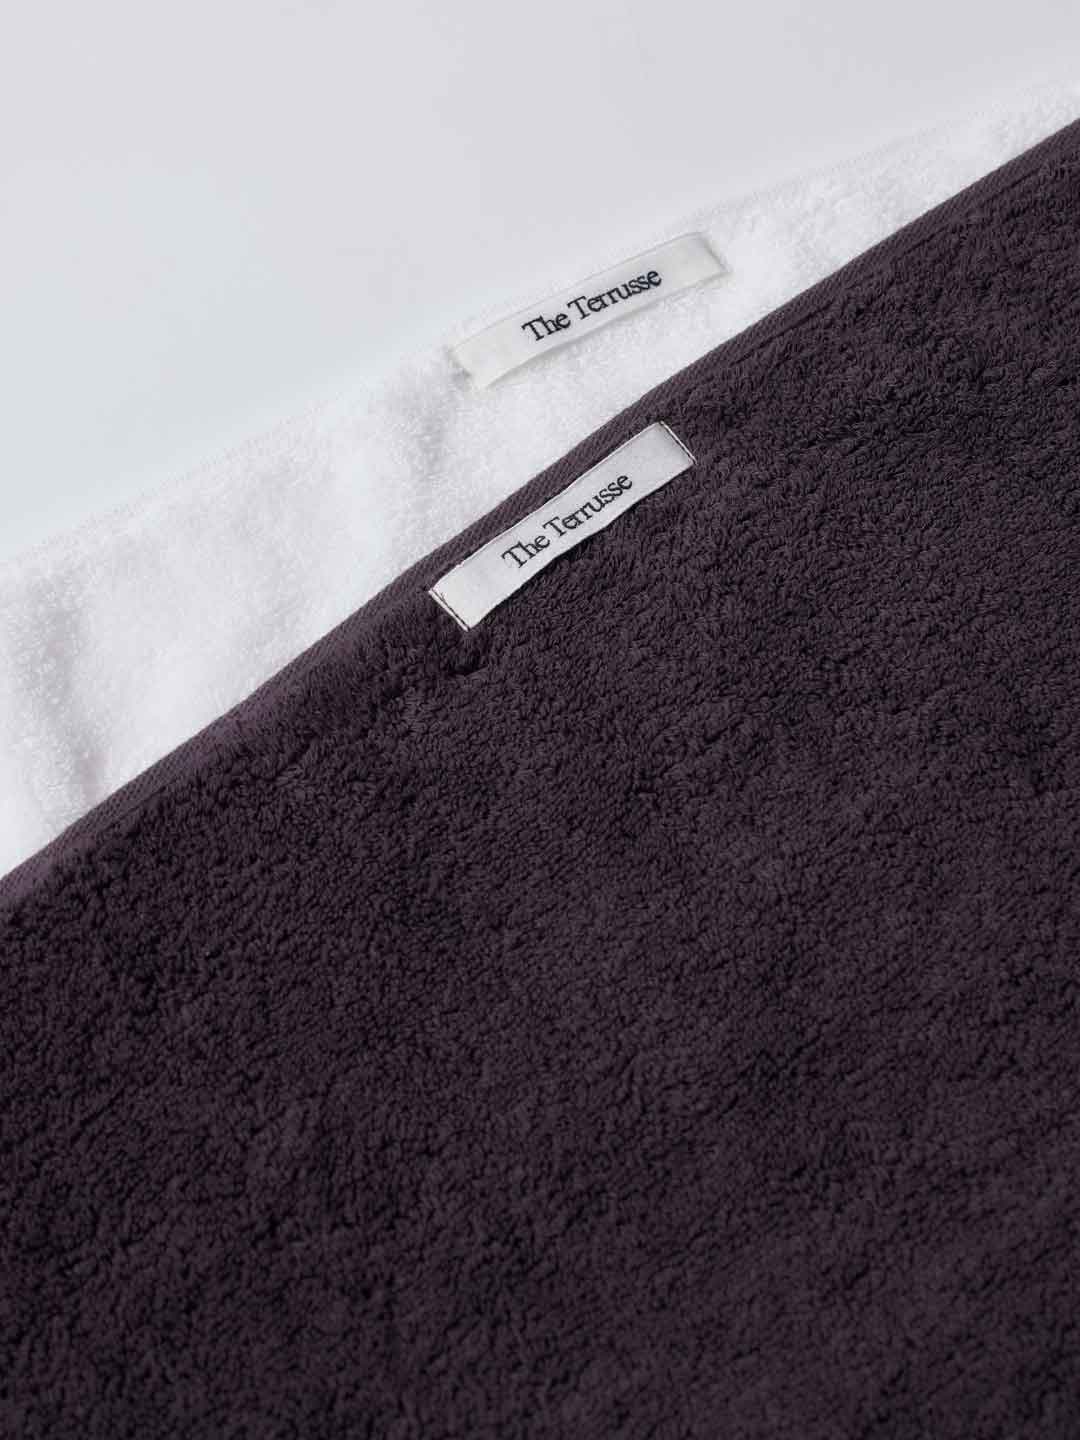 Face Towel - Extra Volume - Brown